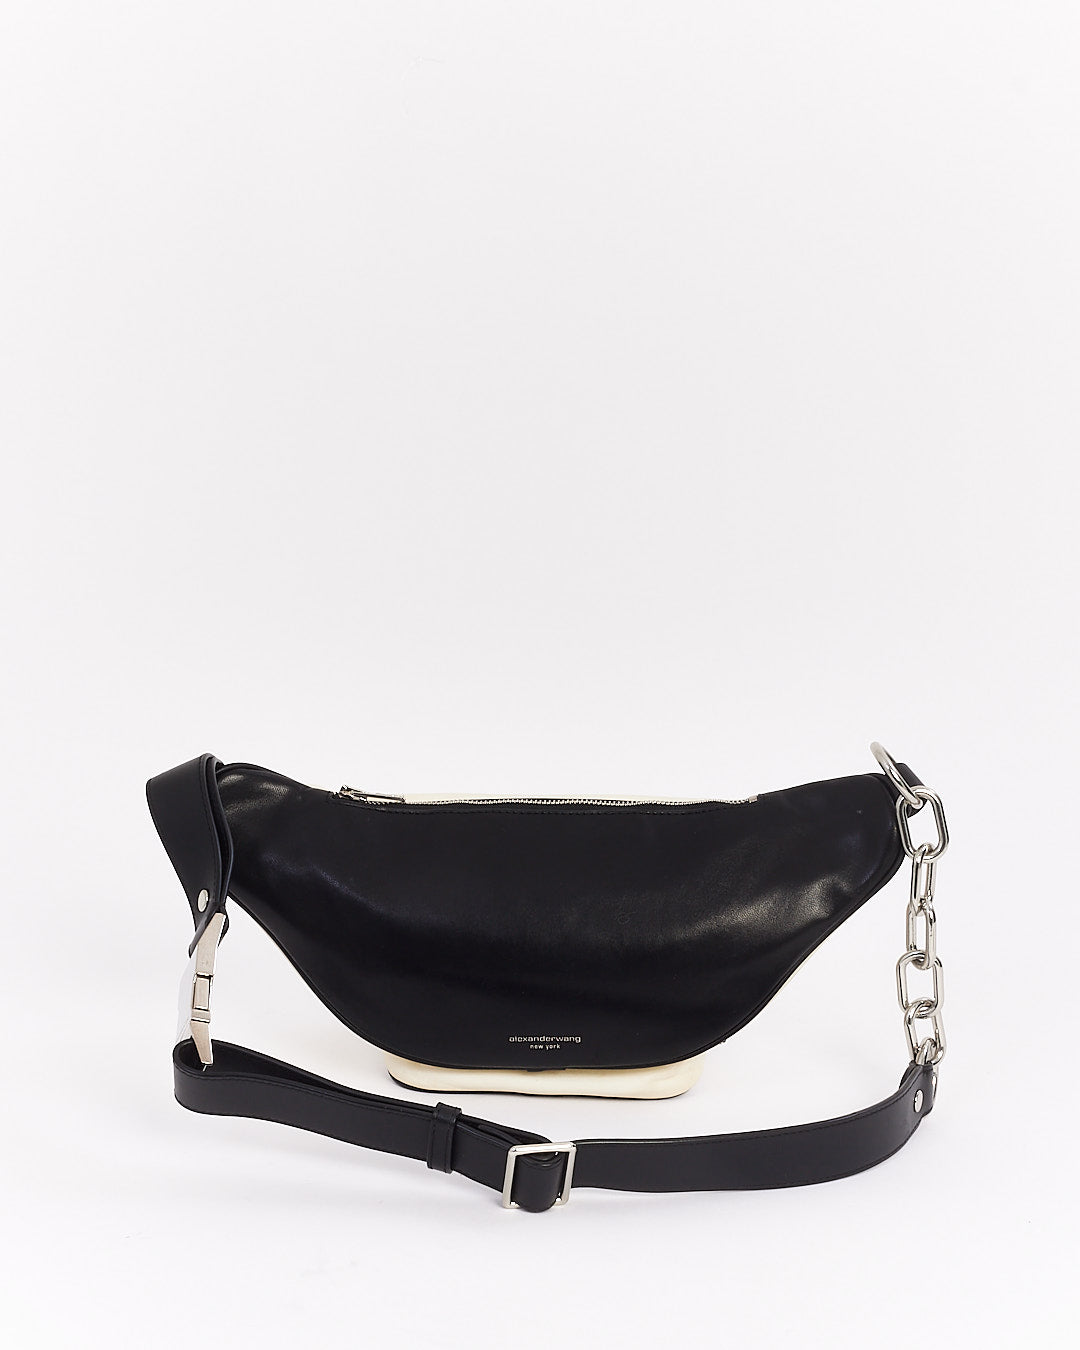 Alexander Wang White and Black Attica Fanny Pack